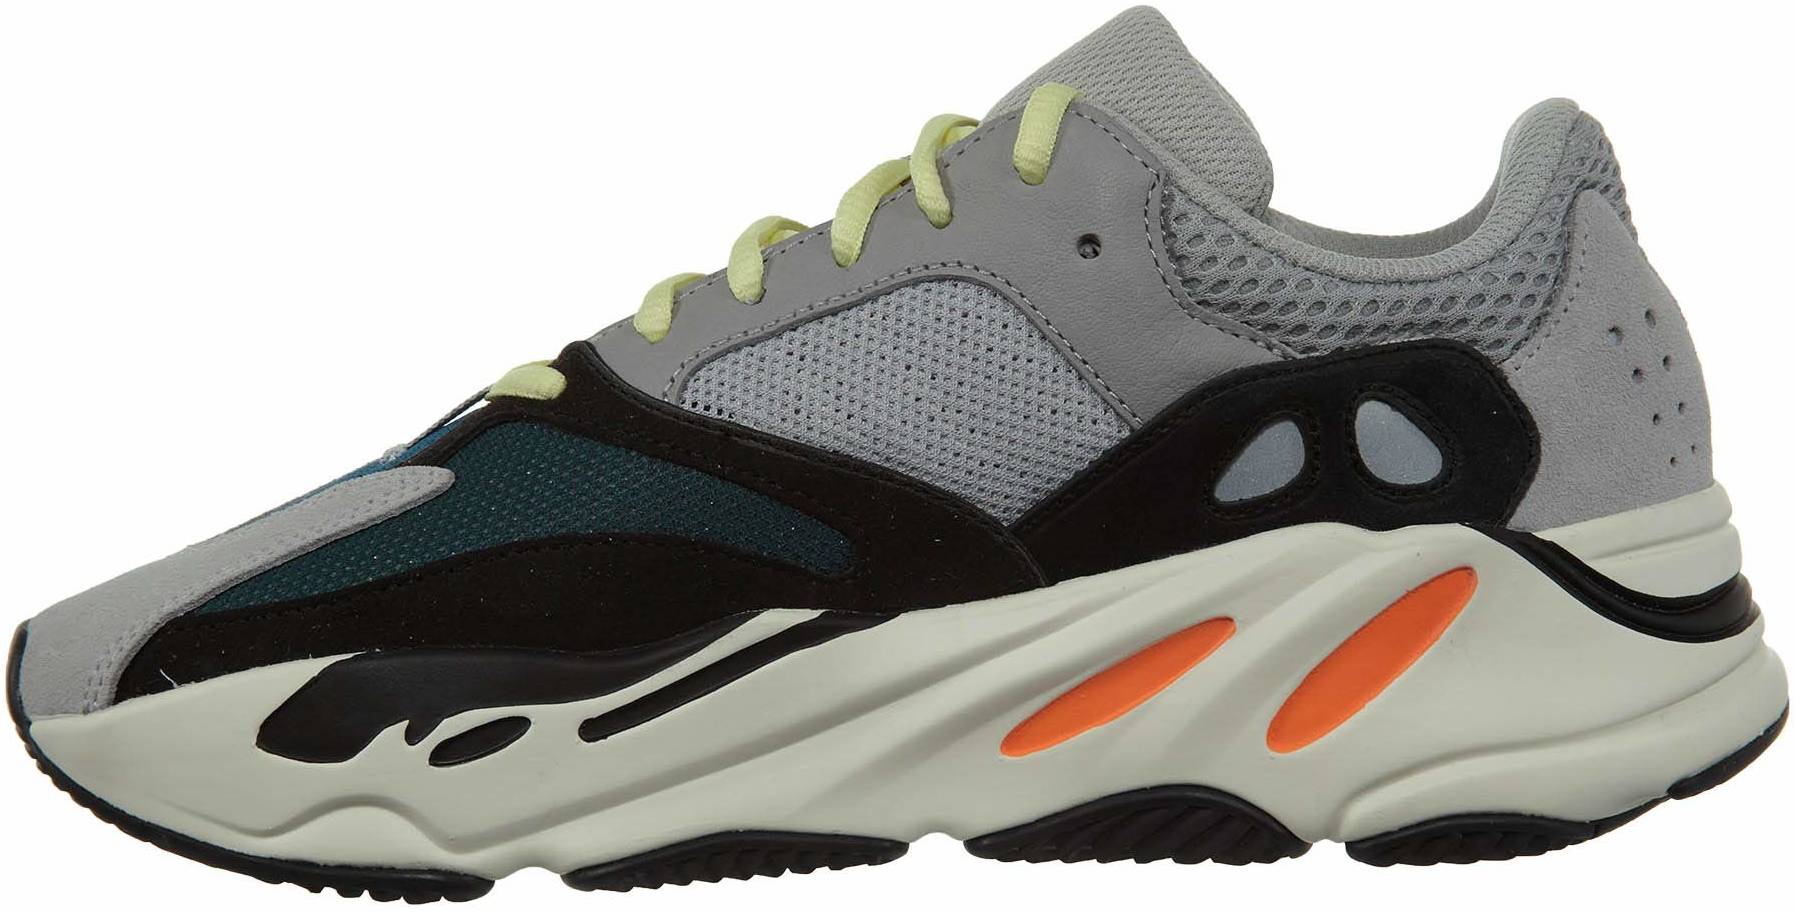 Adidas Yeezy Boost 700 sneakers in 10+ colors (only $265) | RunRepeat